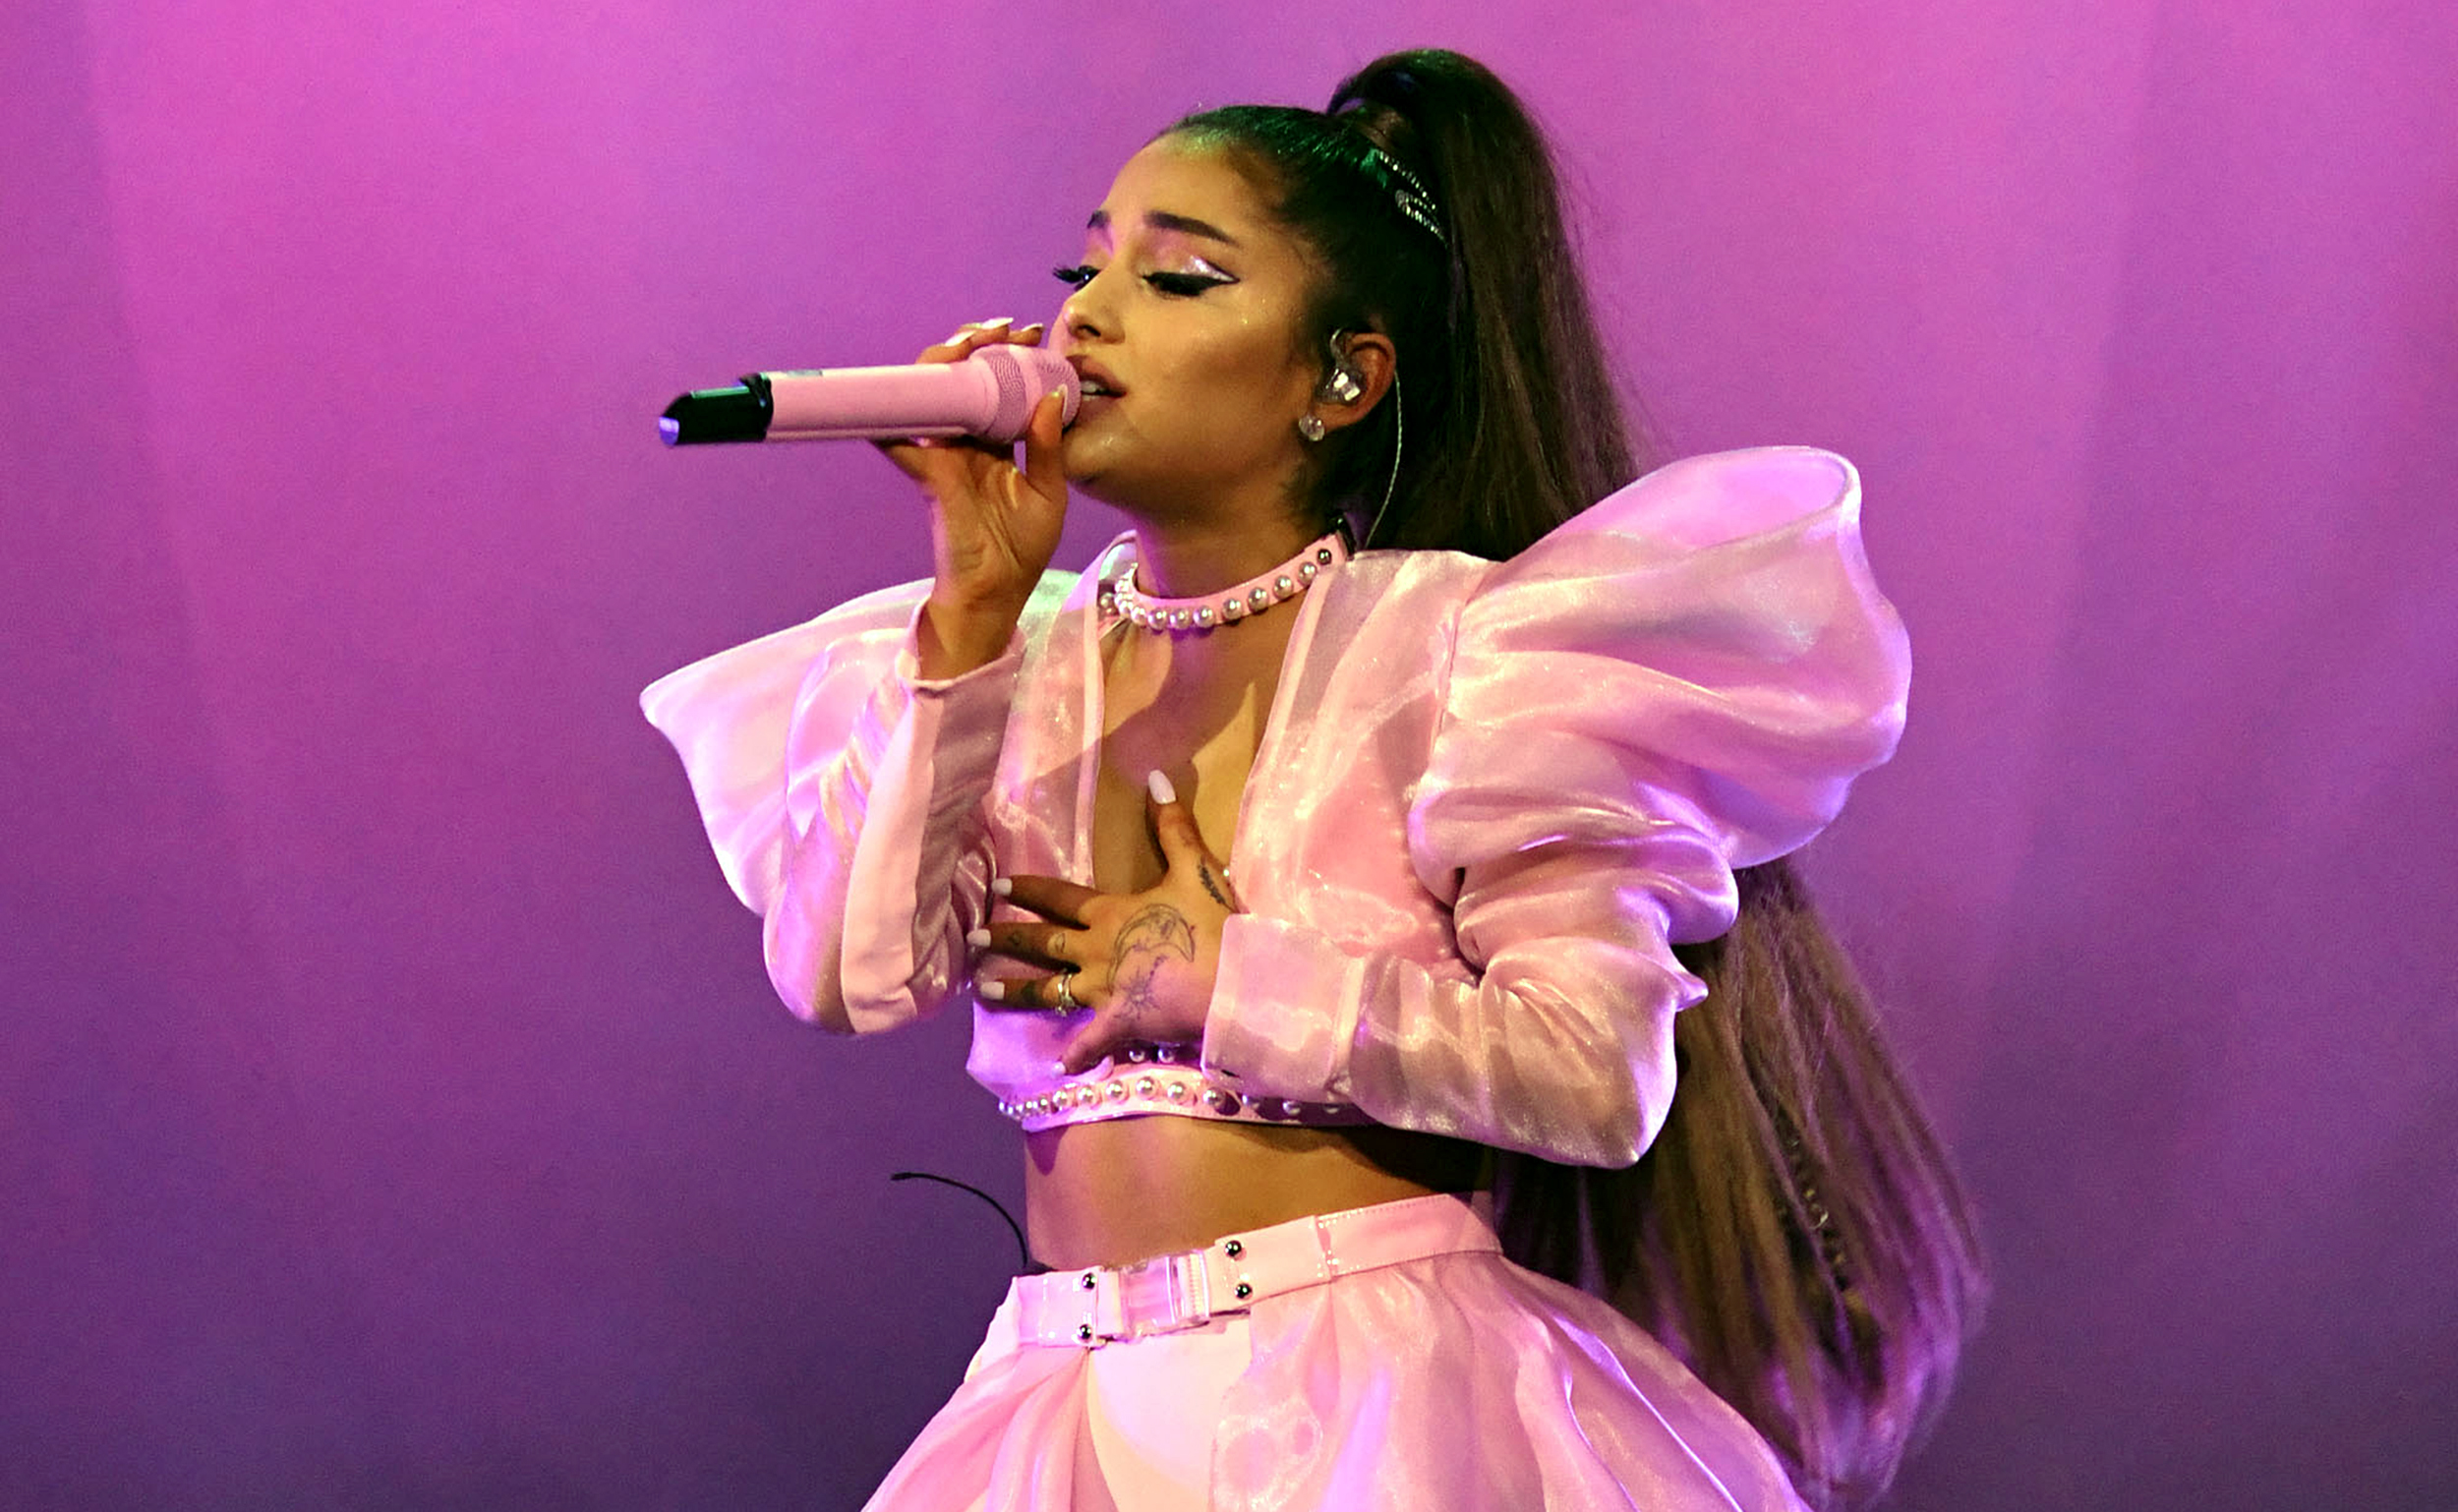 Ariana Grande just acquired her 20th Guinness World Records title